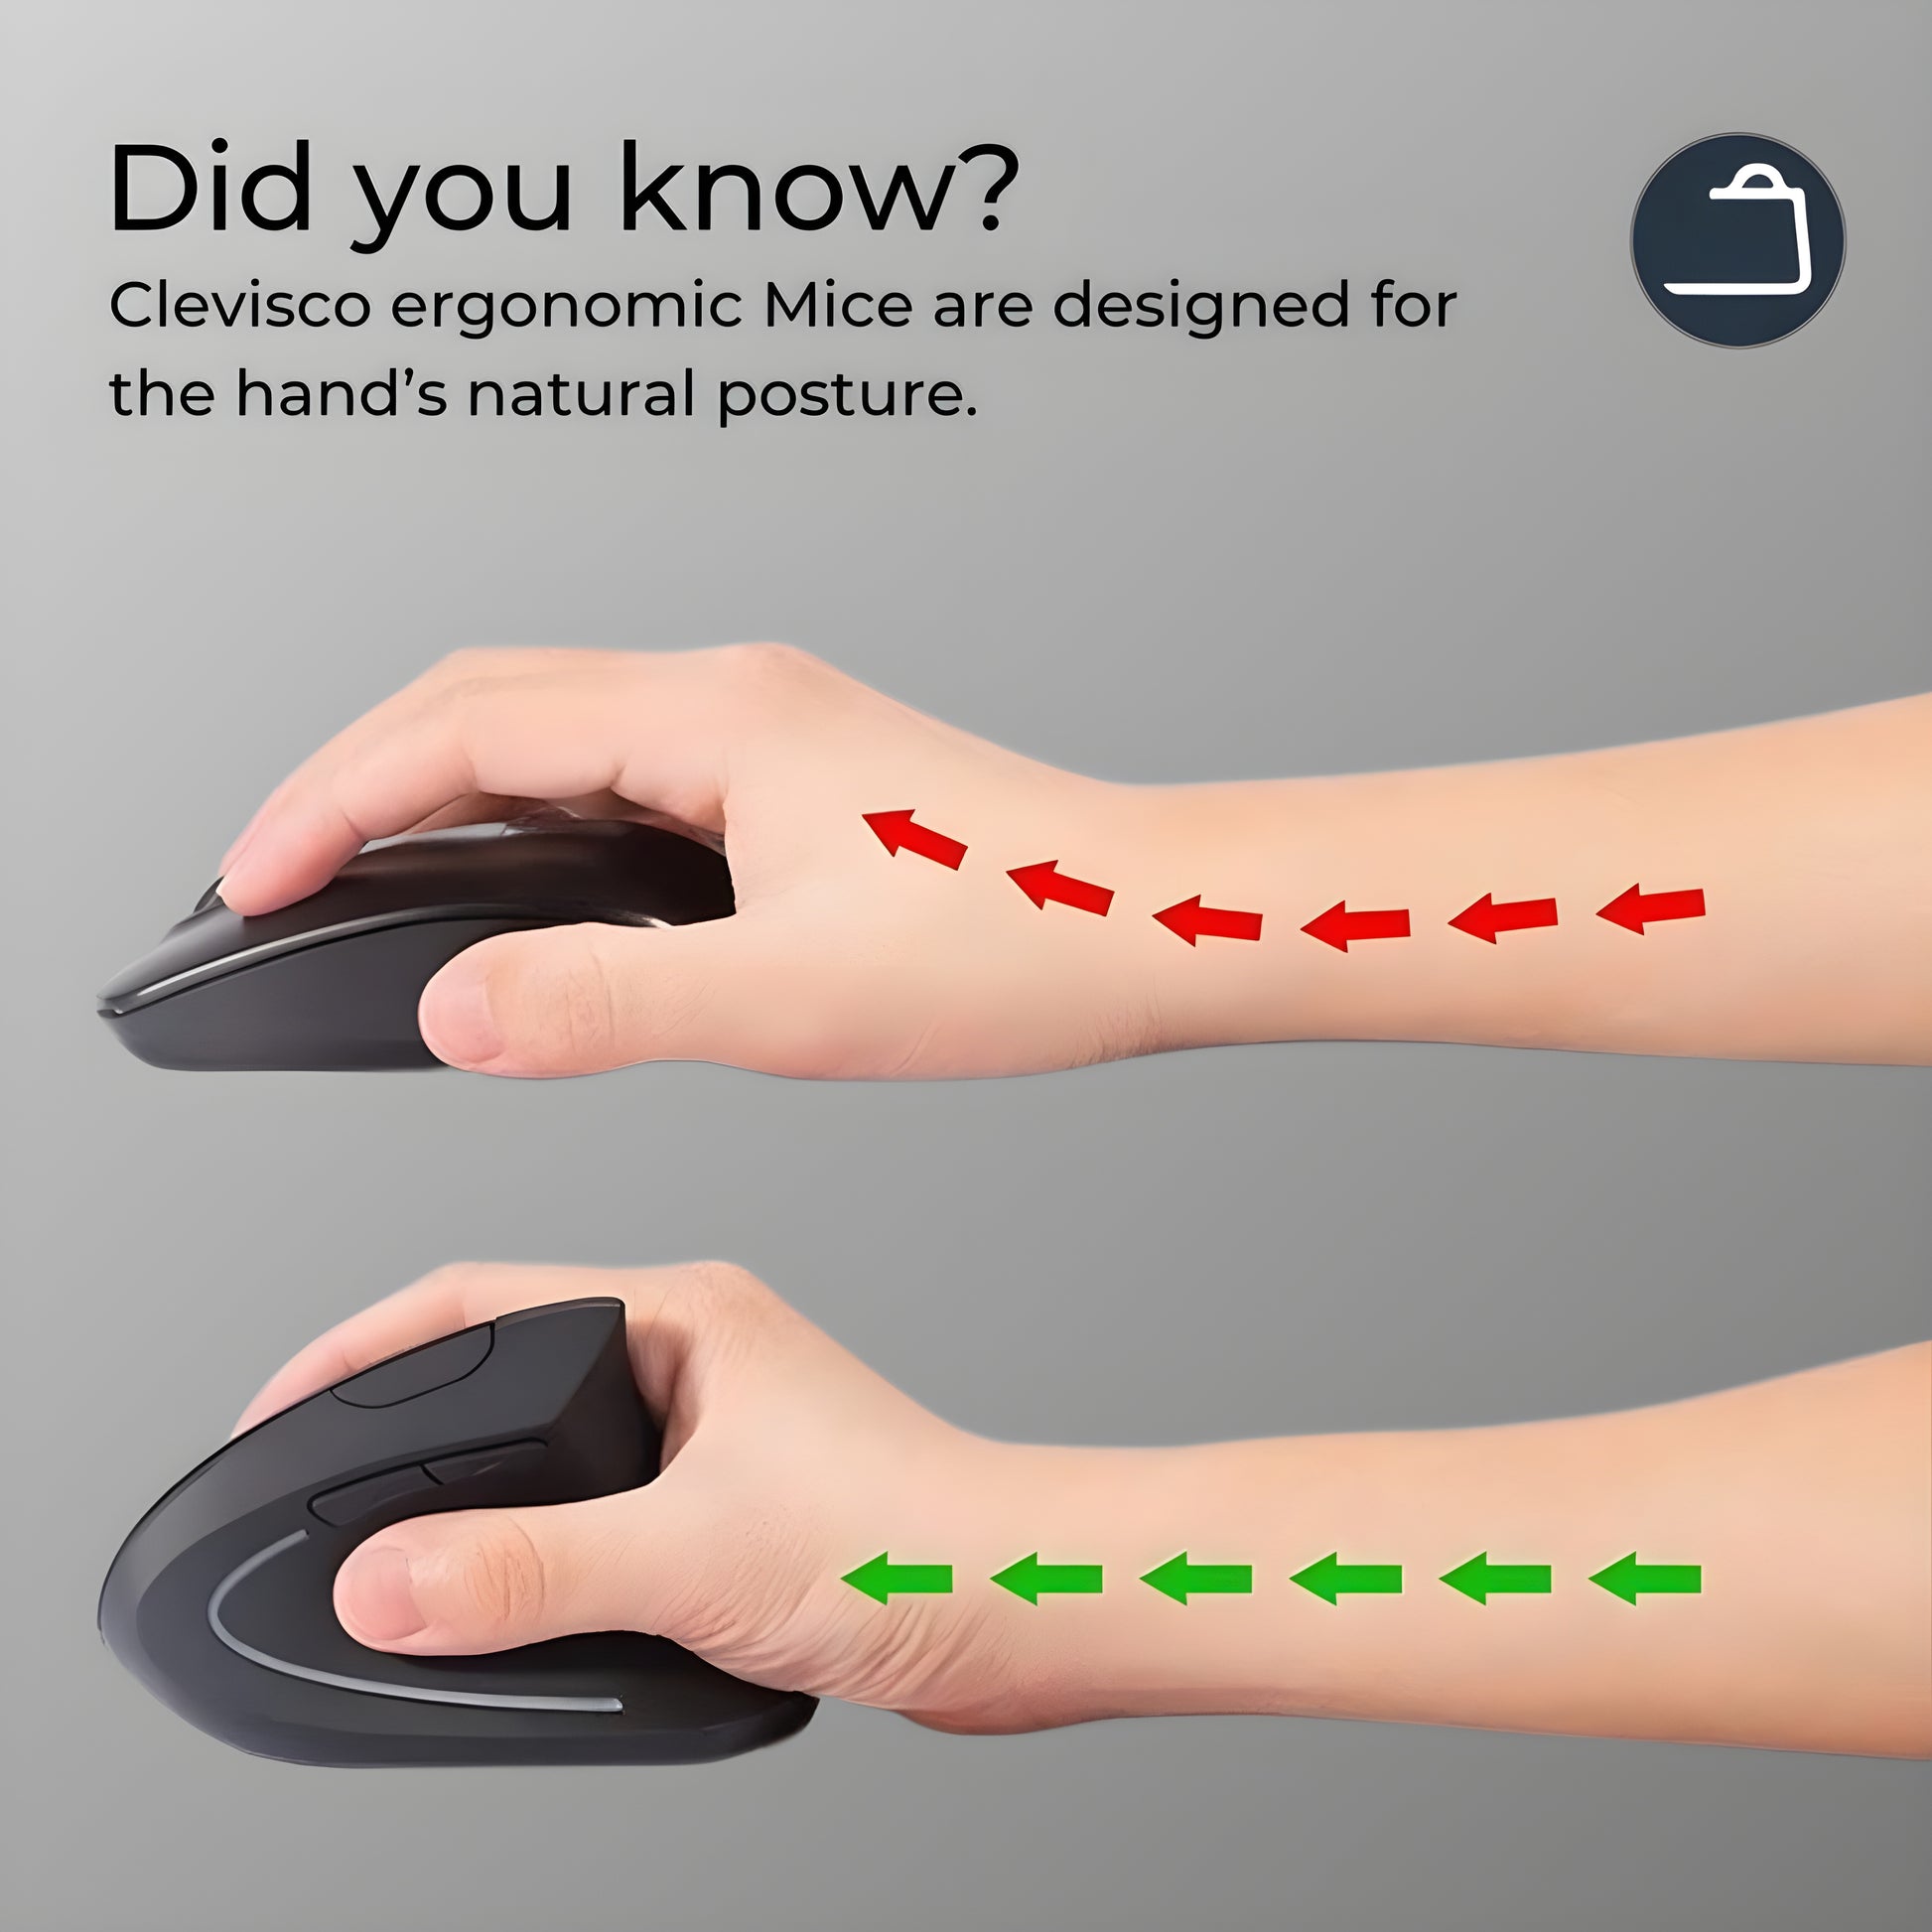 An infographic showcasing a hand in two positions: one using a standard mouse, indicated by red arrows suggesting strain, and the other using a Clevisco ergonomic mouse, indicated by green arrows suggesting comfort. The caption reads 'Did you know? Clevisco ergonomic Mice are designed for the hand’s natural posture.' Highlighting the health benefits of ergonomic design.